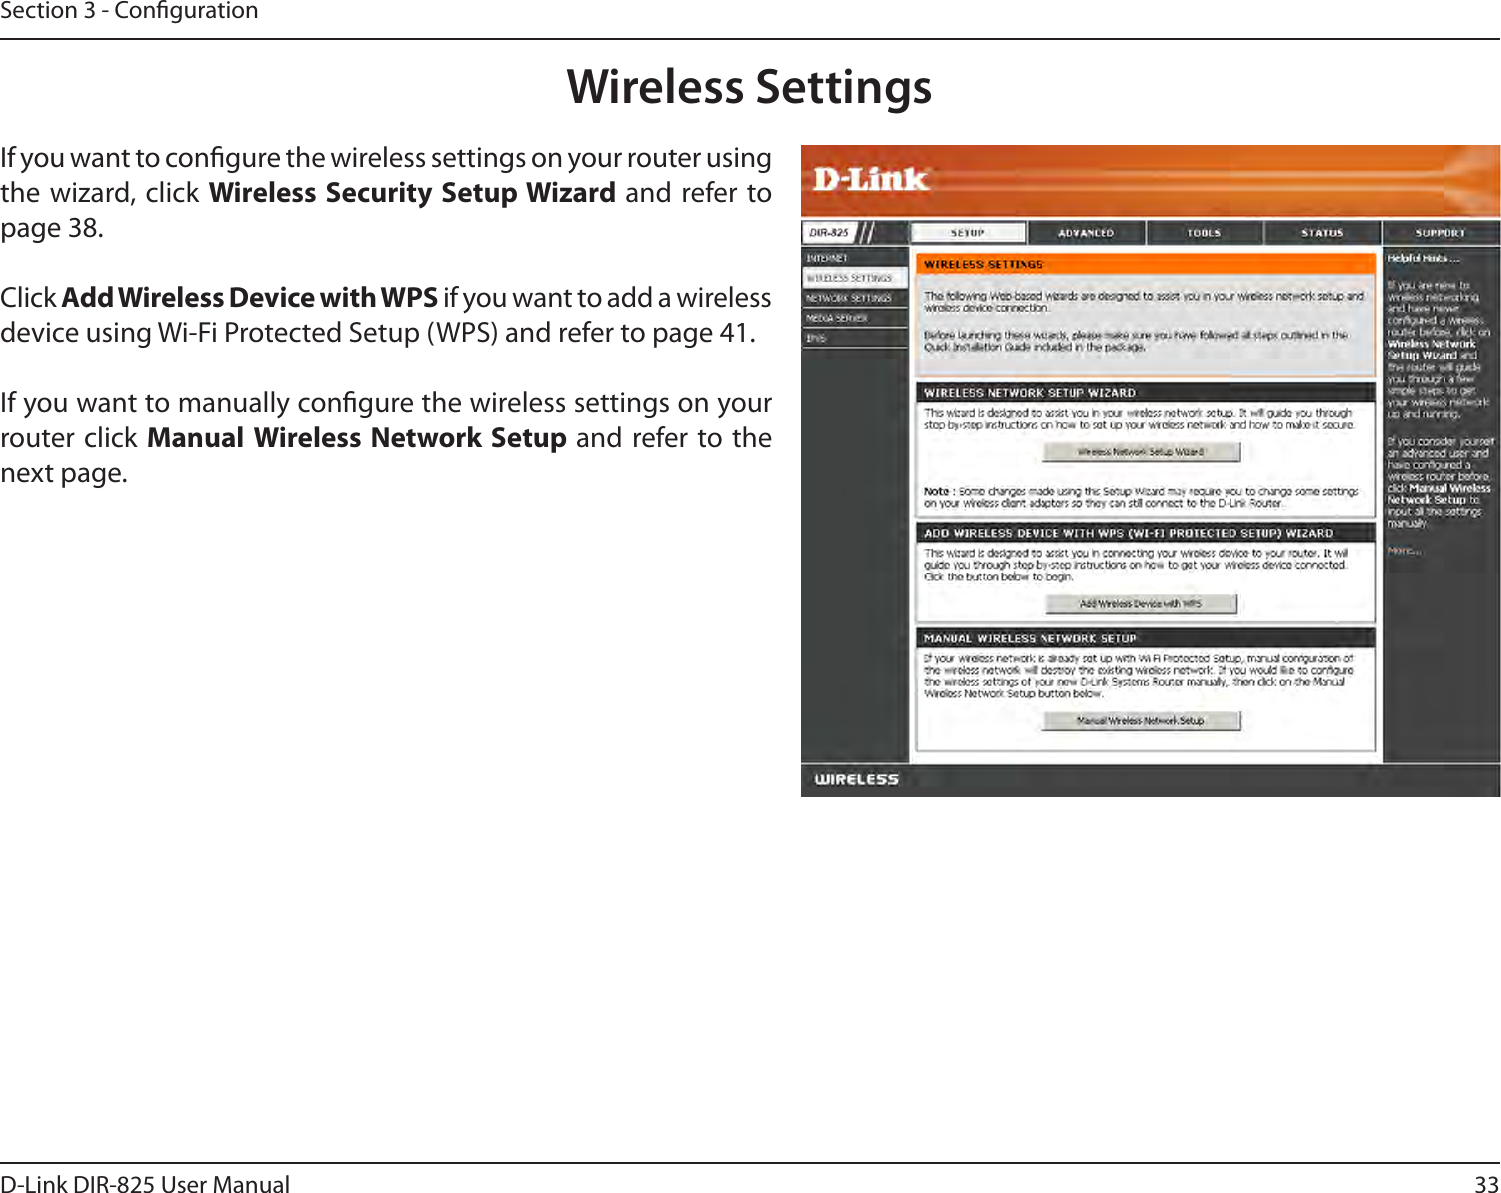 33D-Link DIR-825 User ManualSection 3 - CongurationWireless SettingsIf you want to congure the wireless settings on your router using the wizard, click  Wireless Security Setup Wizard and refer to page 38.Click Add Wireless Device with WPS if you want to add a wireless device using Wi-Fi Protected Setup (WPS) and refer to page 41.If you want to manually congure the wireless settings on your router click Manual Wireless Network Setup and refer to the next page.